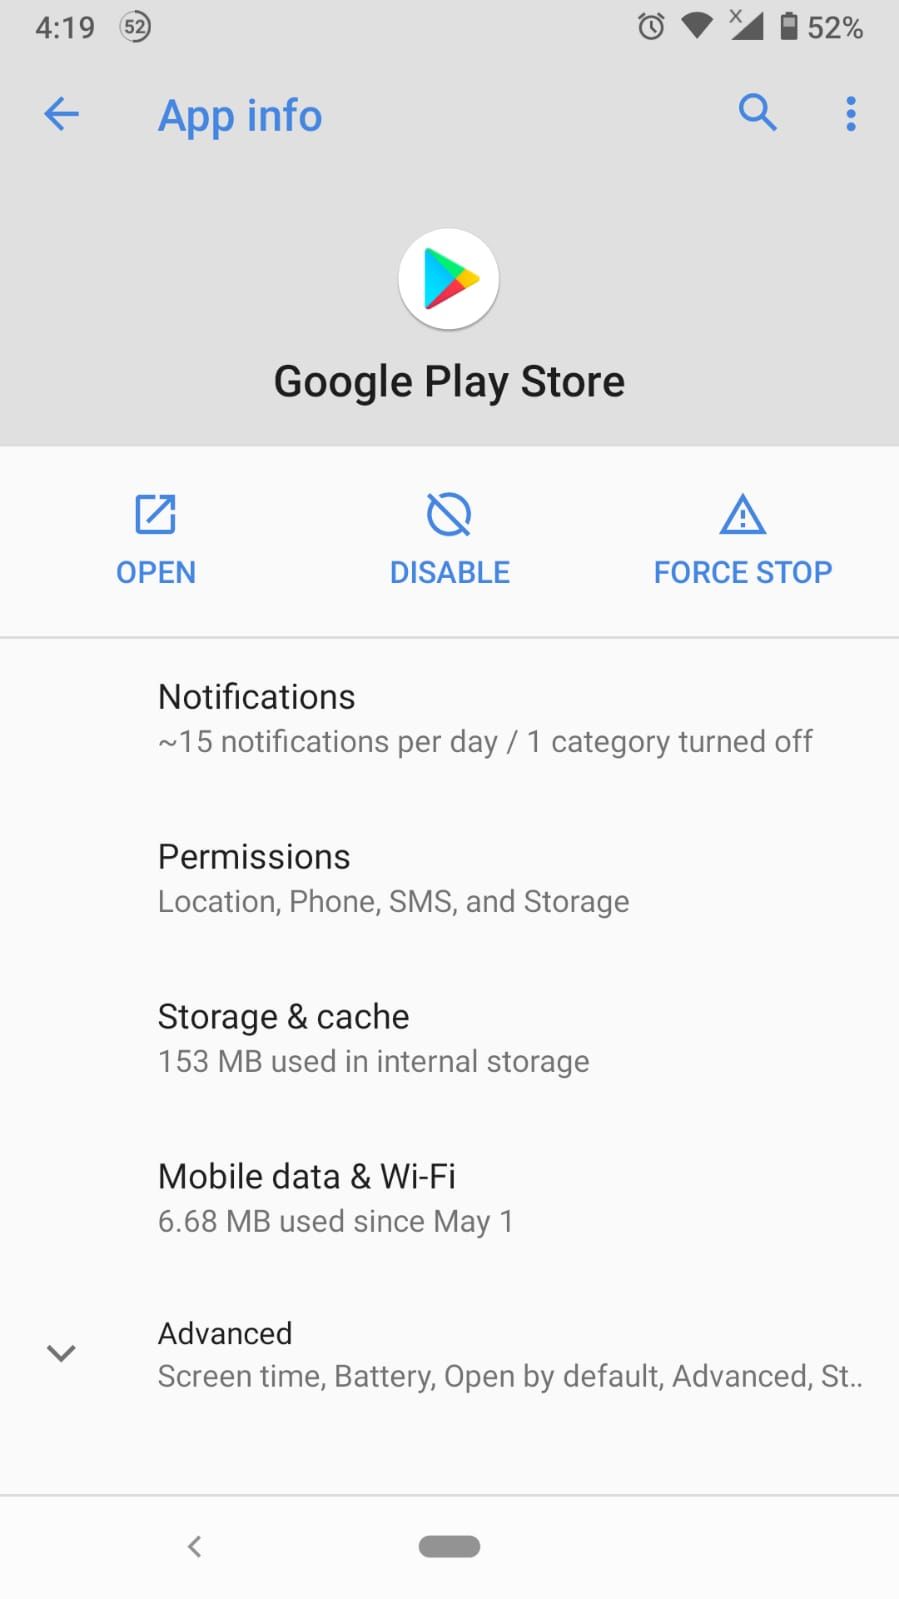 Why Can't I Download Certain Apps on the Google Play Store?